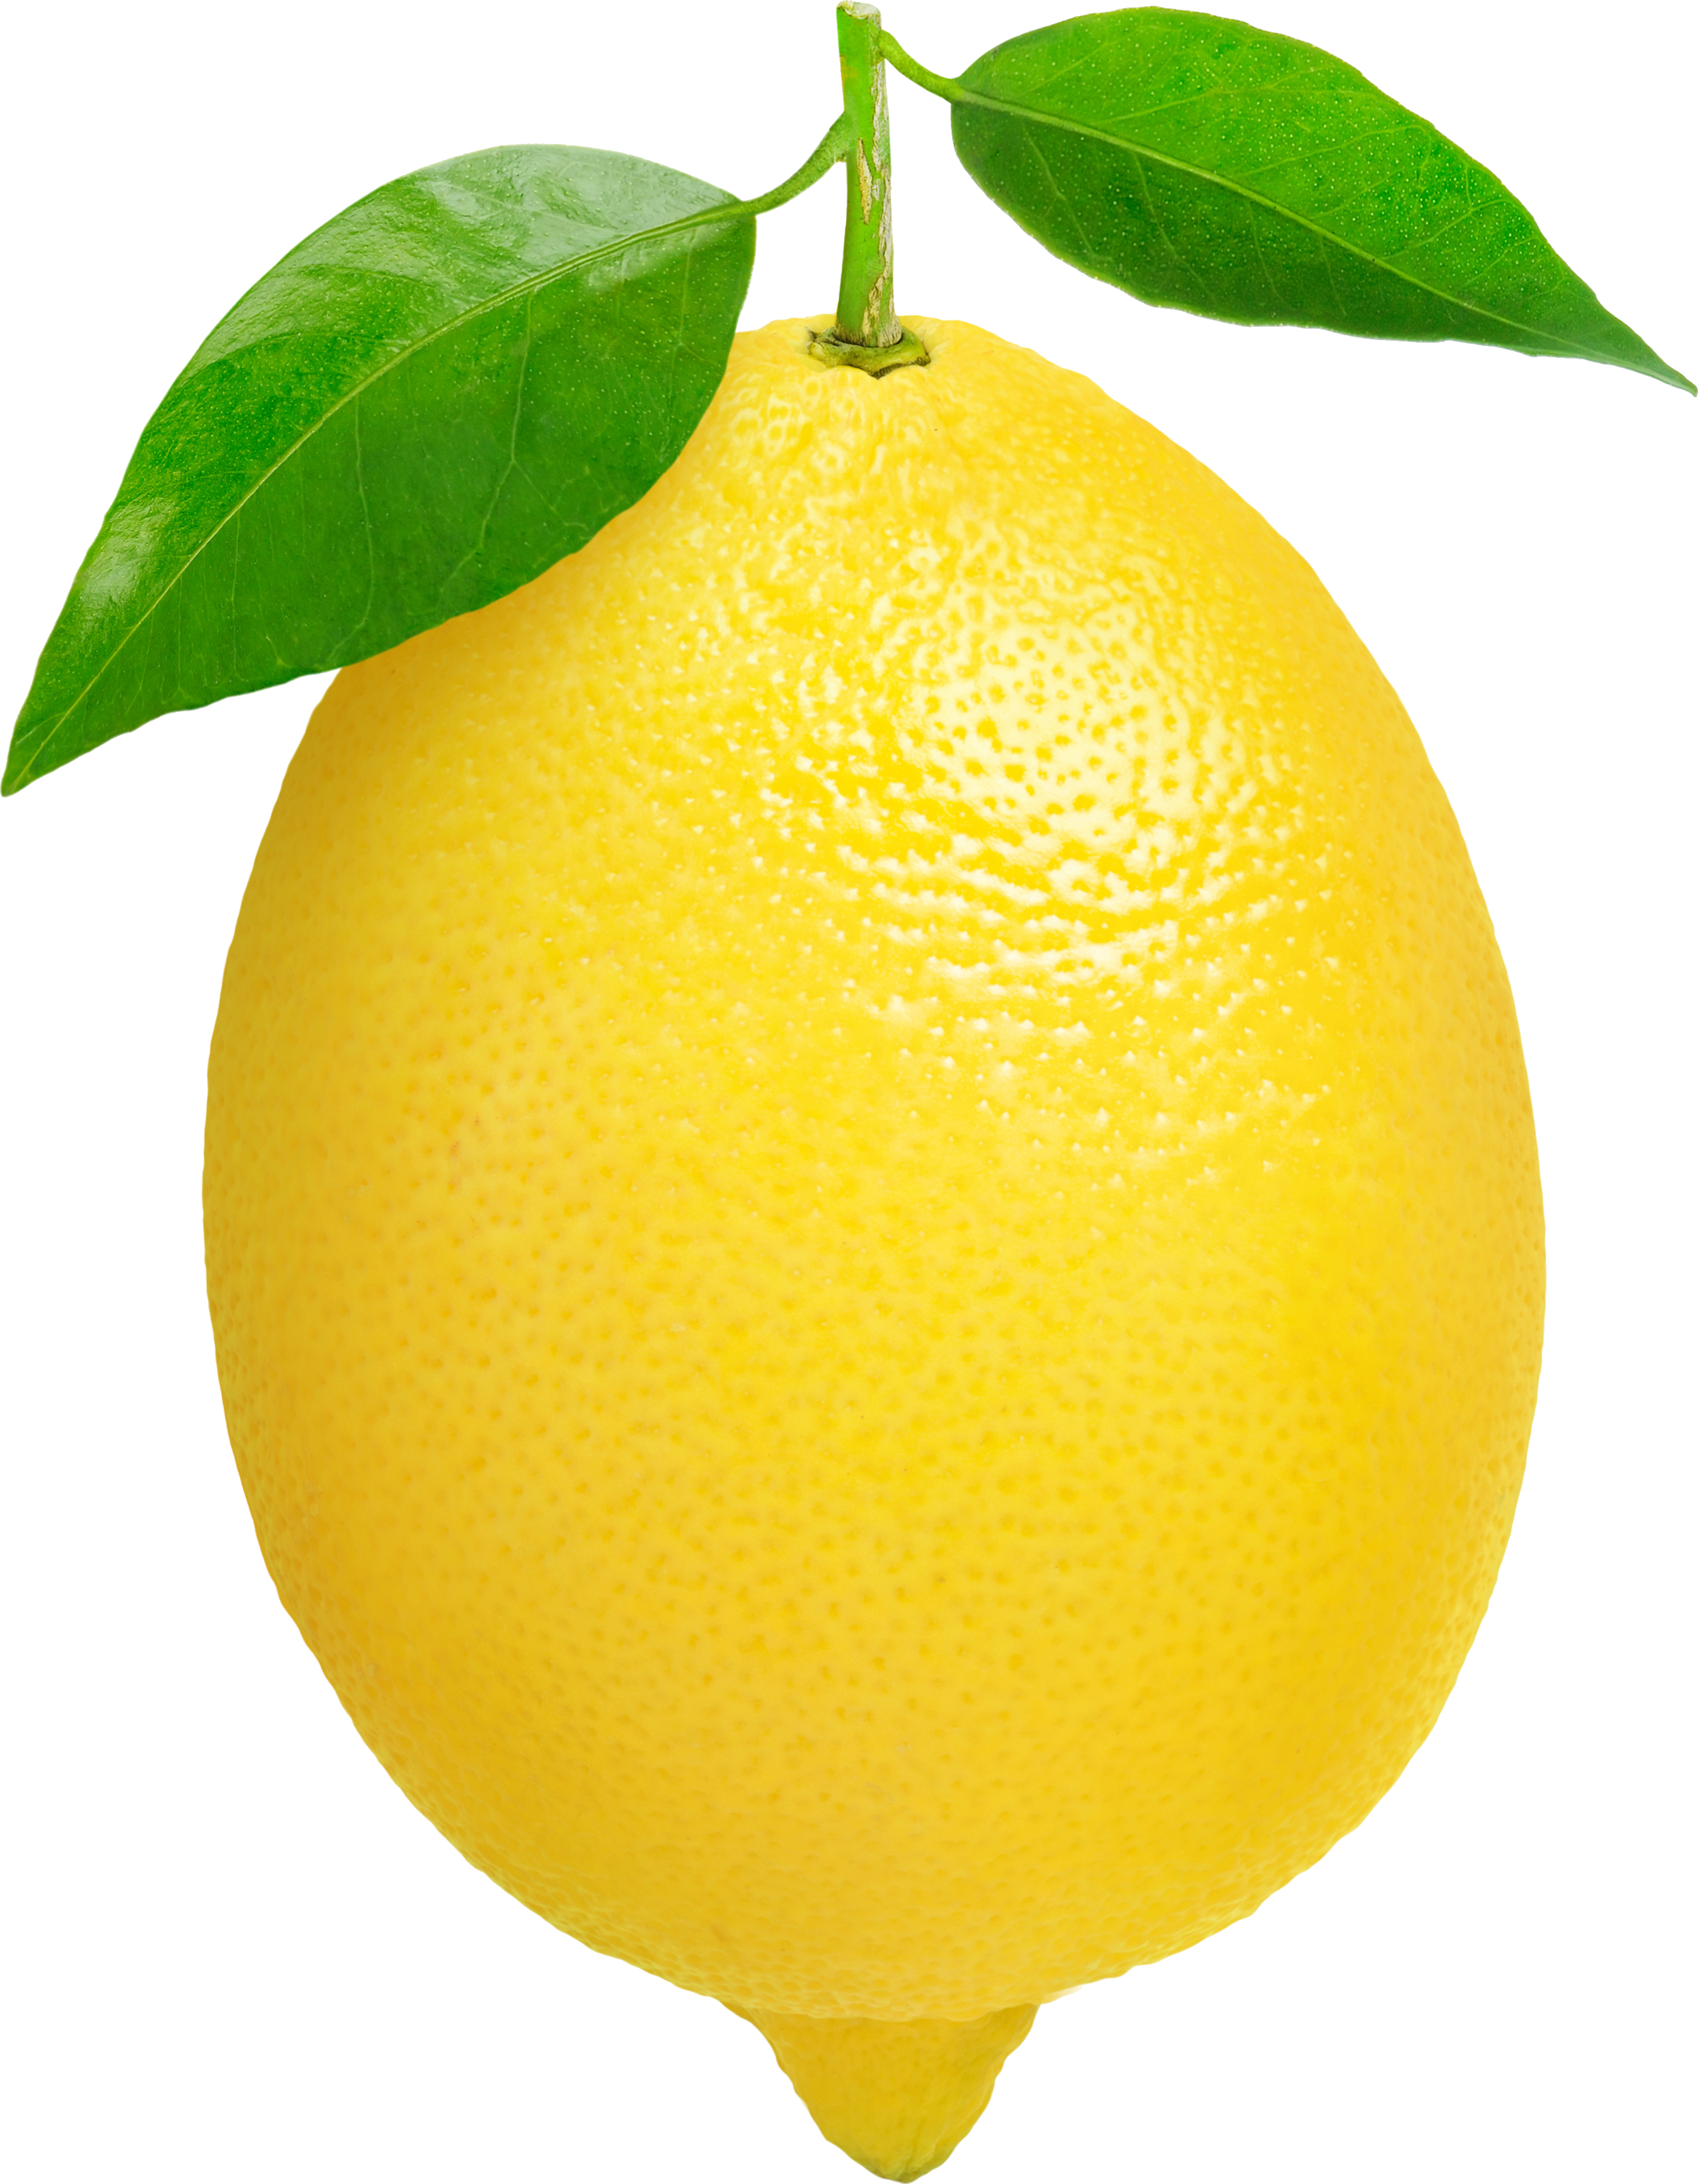 Free Transparent Lemon Download Free Clip Art Free Clip Art On Clipart Library